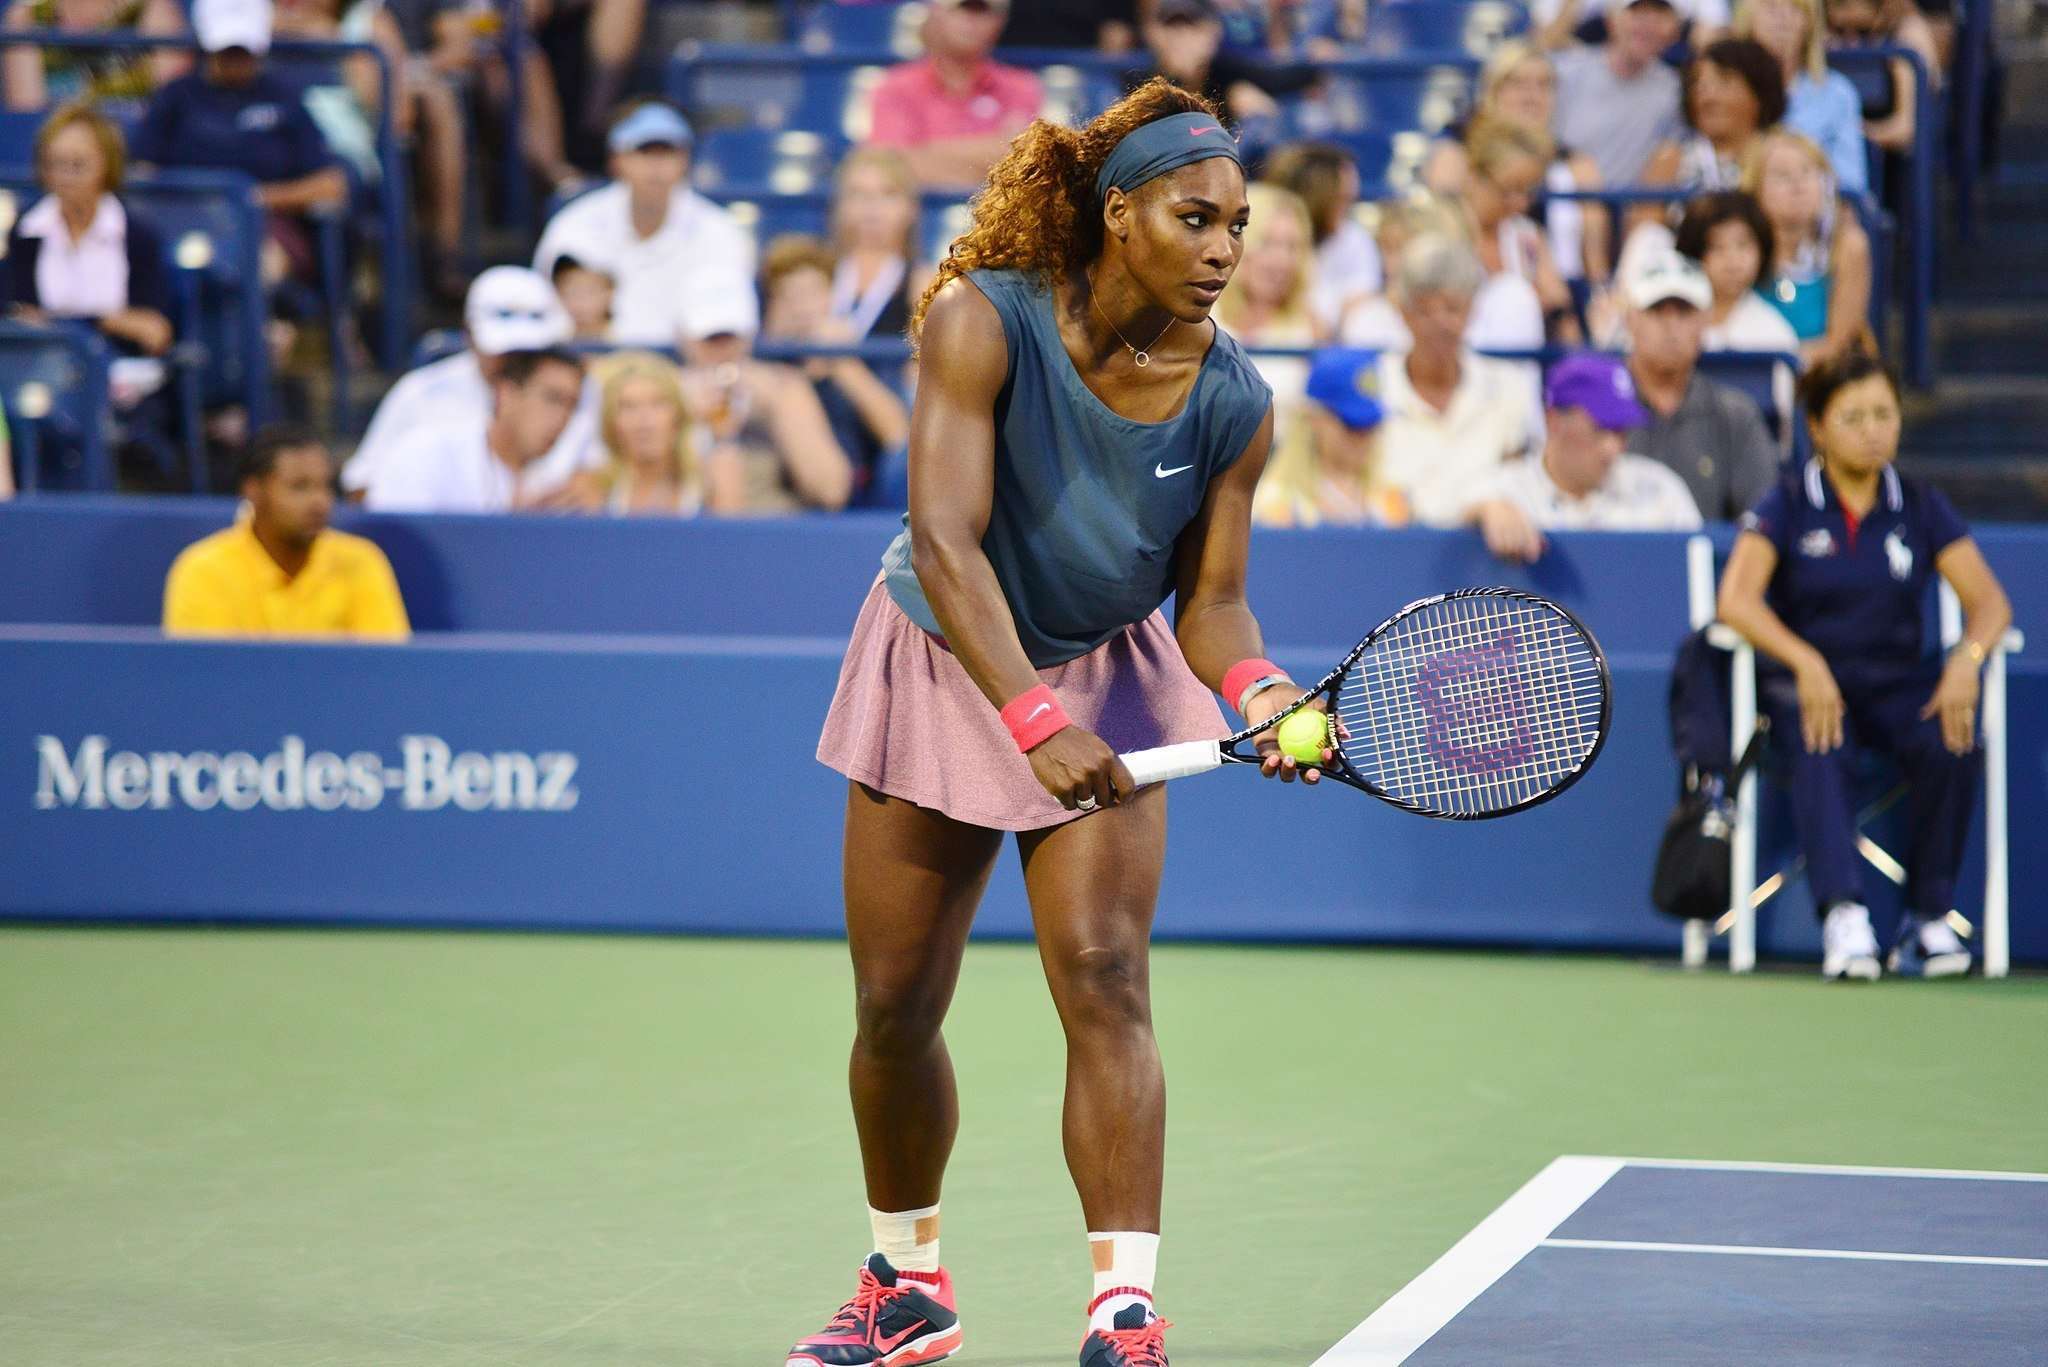 Serena Willams about to to serve a tennis ball